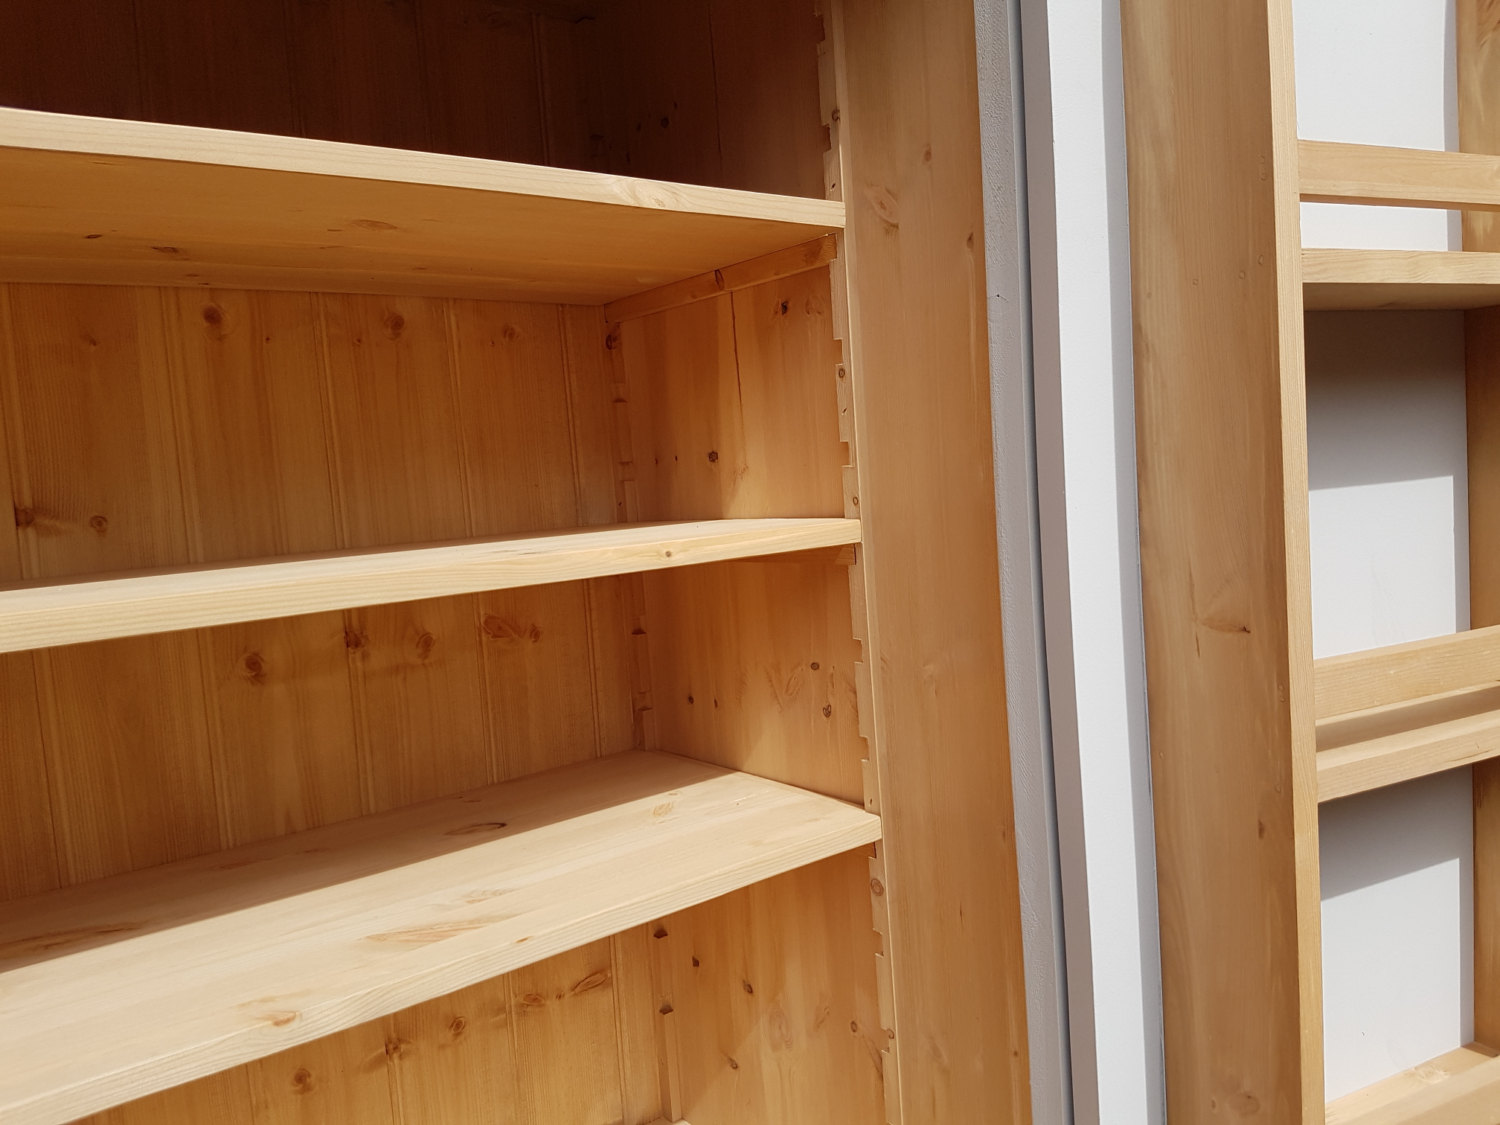 Bespoke Larder Cupboard - made to order, any size & colour